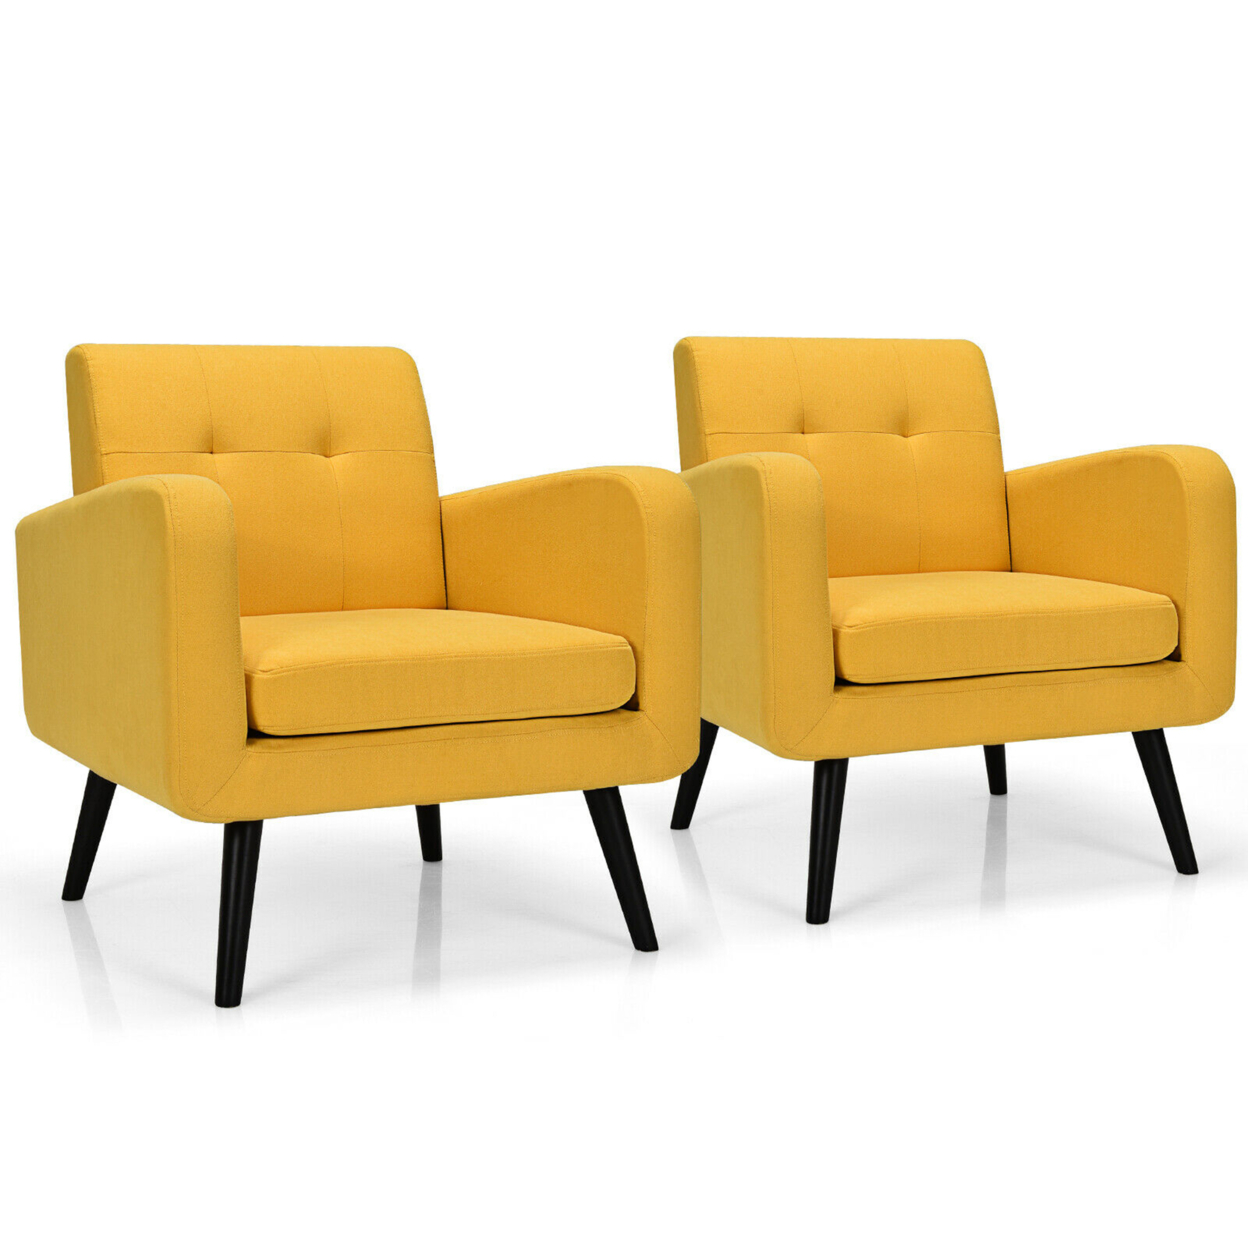 2PCS Accent Armchair Single Sofa Chair Home Office W/ Wooden Legs Yellow